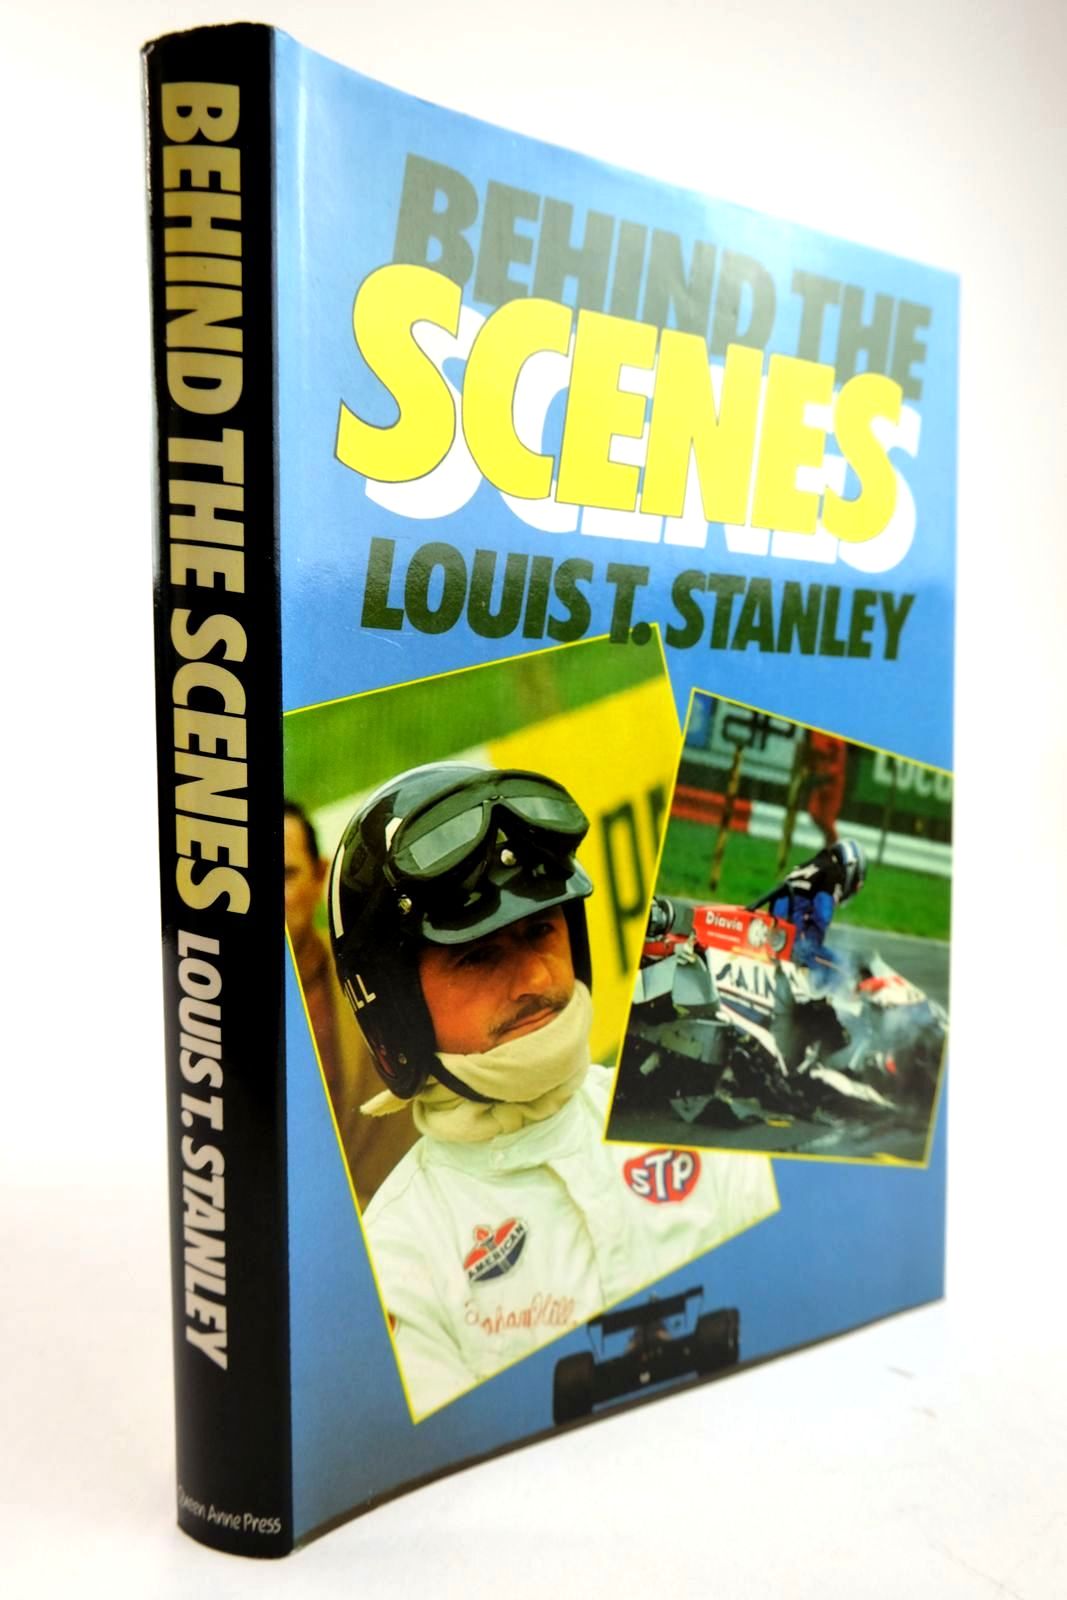 Photo of BEHIND THE SCENES written by Stanley, Louis T. published by Queen Anne Press (STOCK CODE: 2134305)  for sale by Stella & Rose's Books